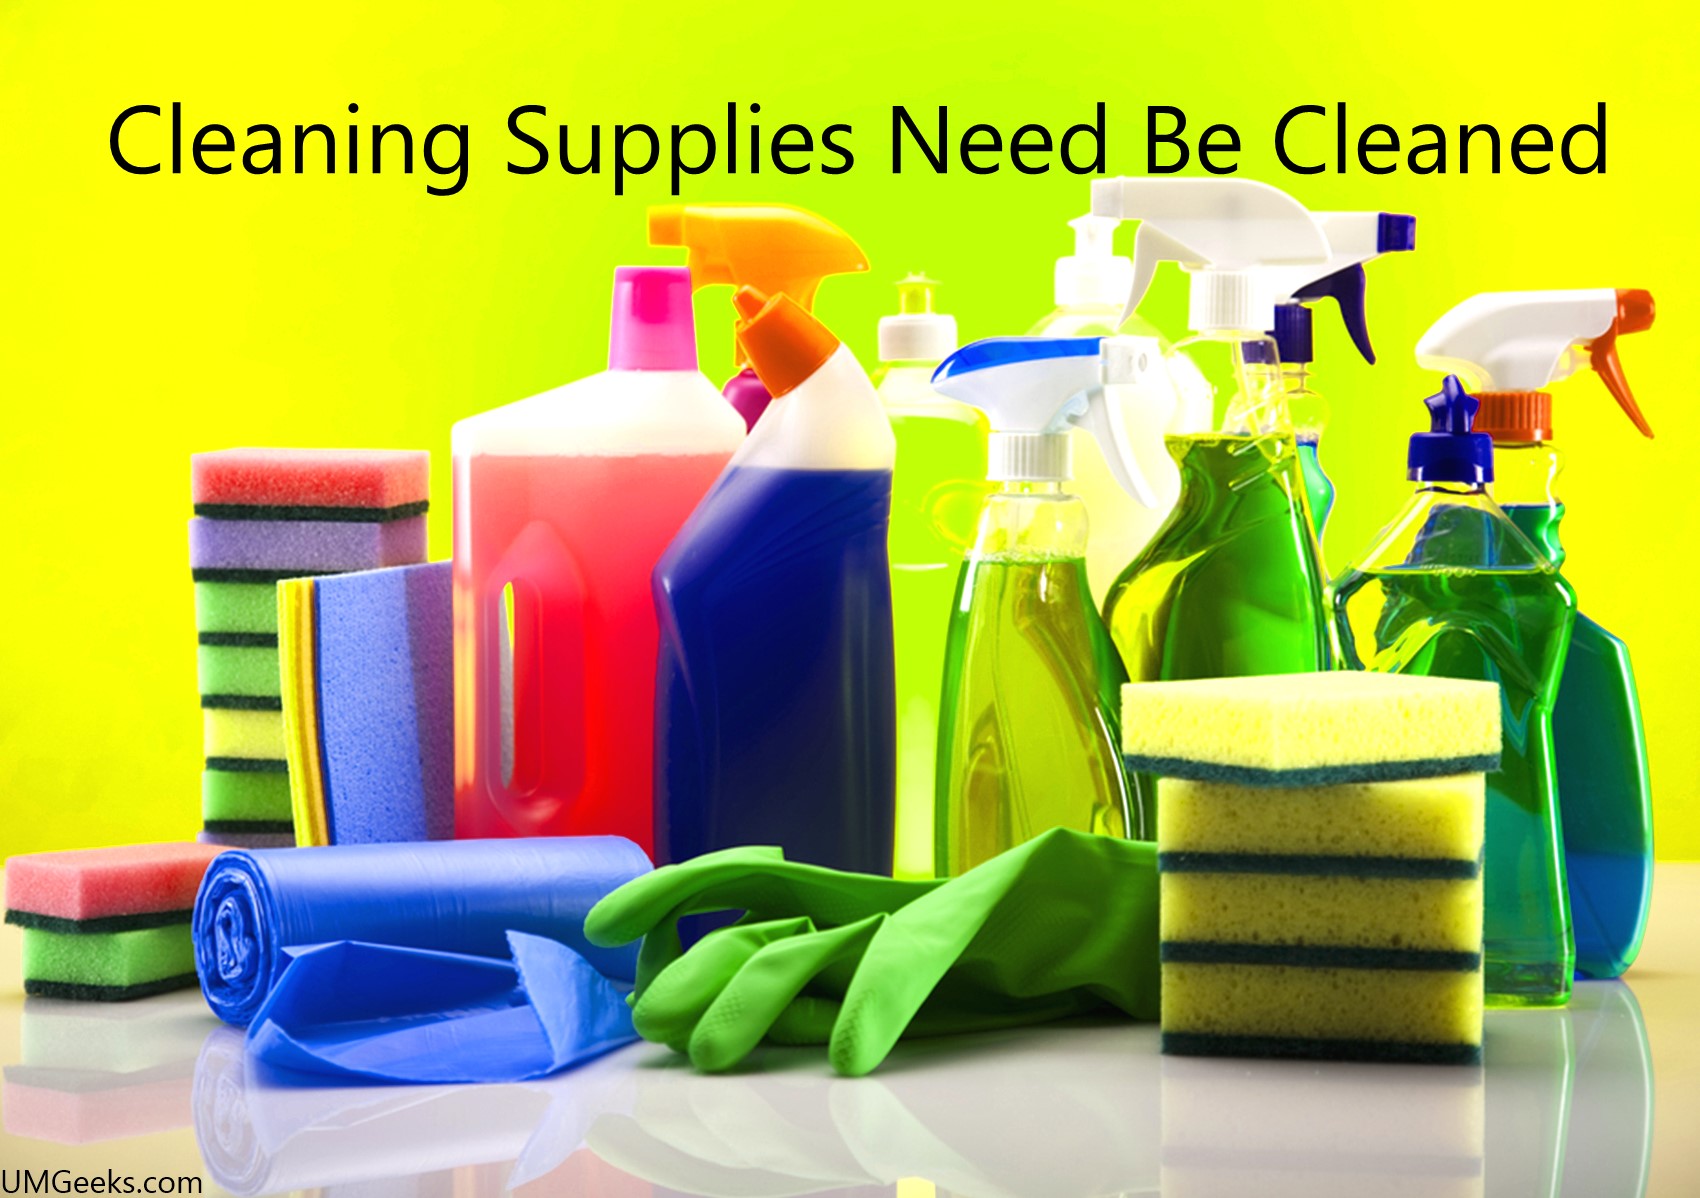 Do Your Cleaning Supplies Need to Be Cleaned?